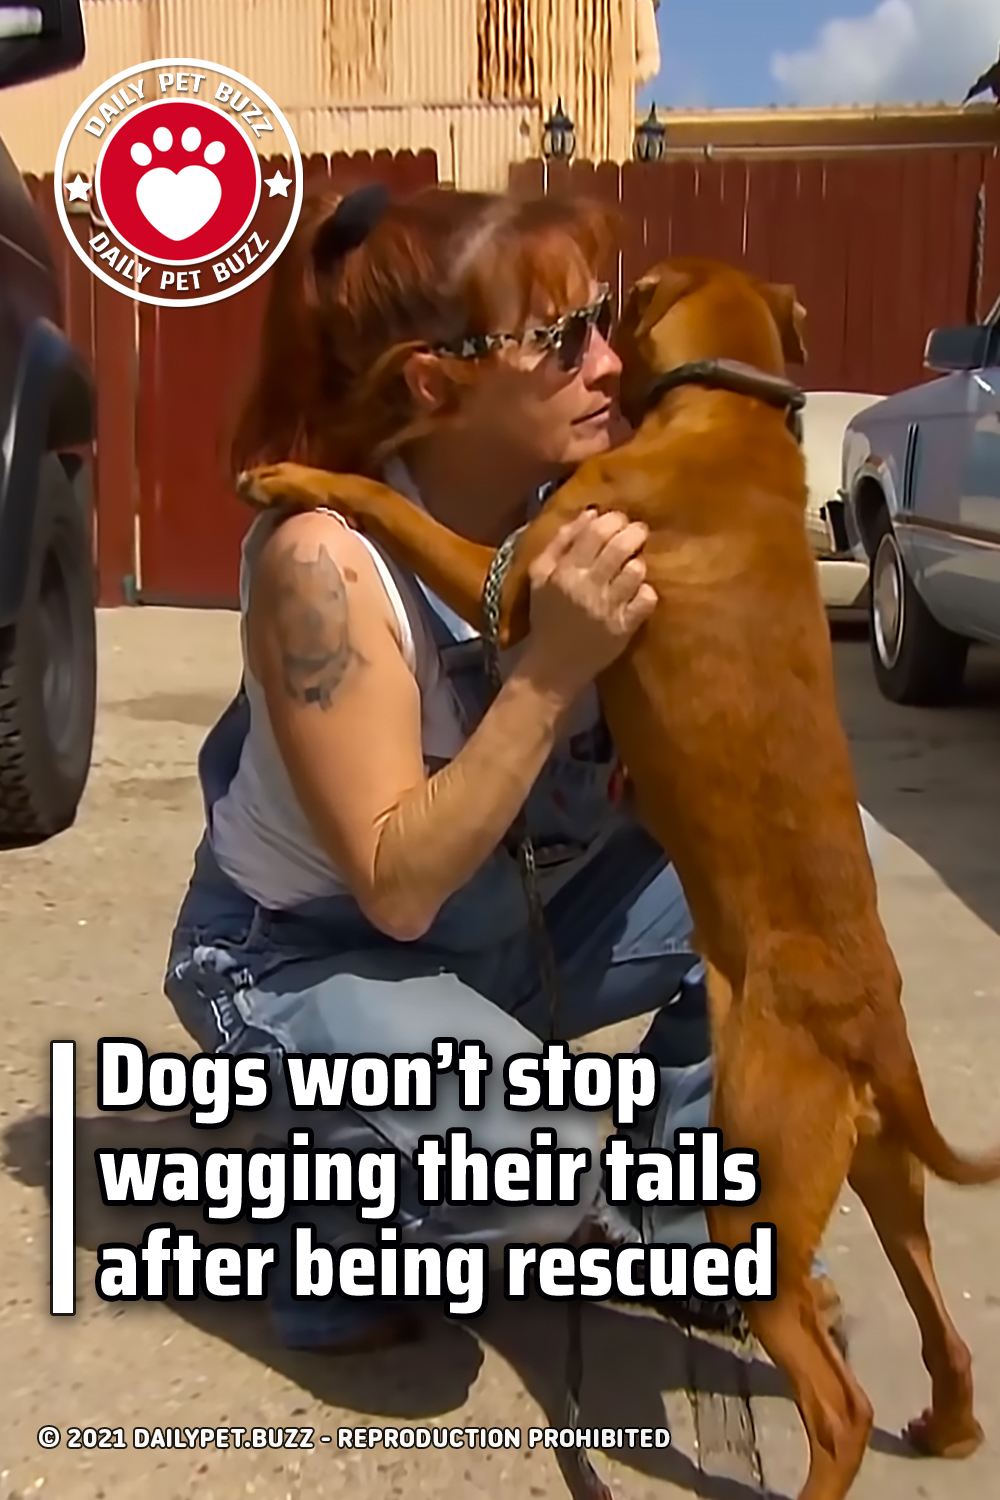 Dogs won’t stop wagging their tails after being rescued